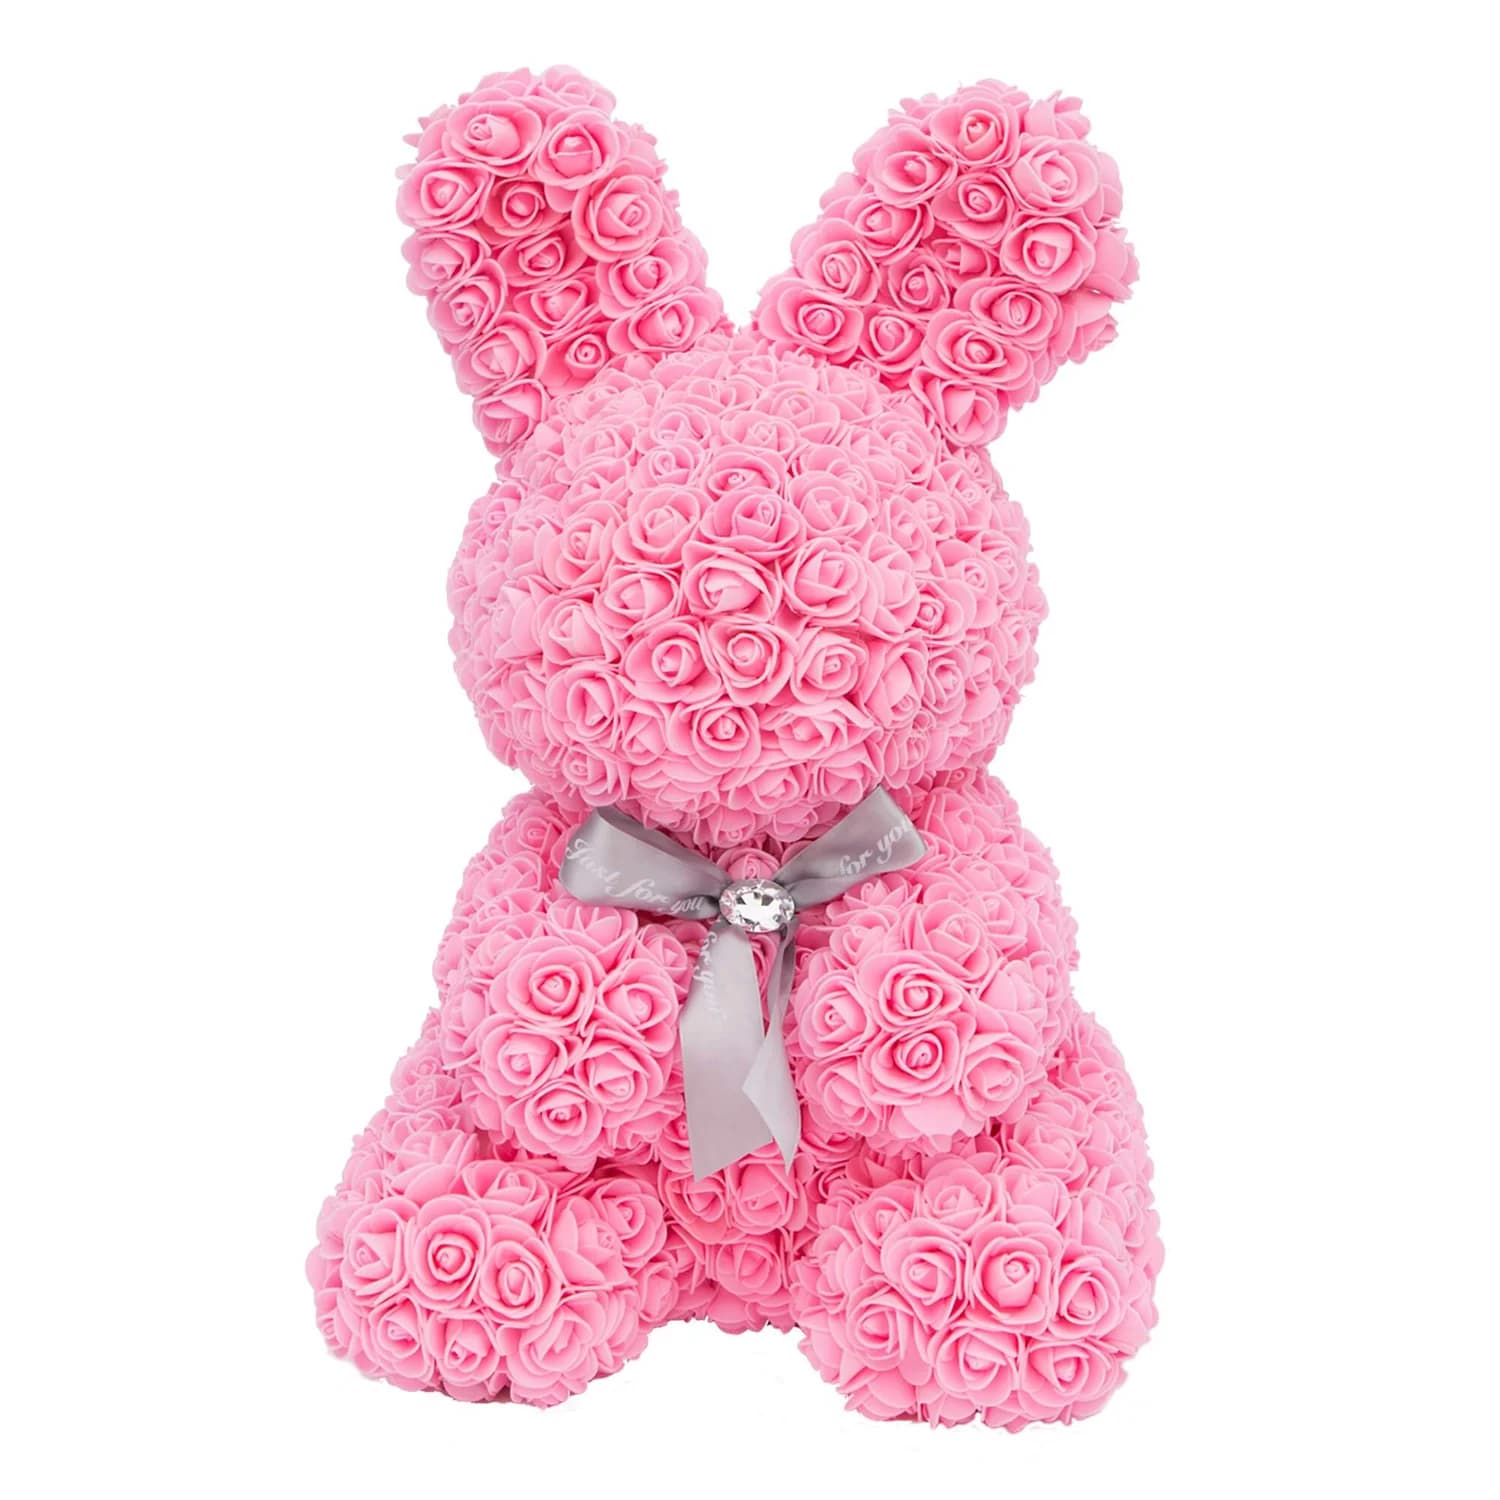 Standing foam Pink Rose Bunny  - A &quot;Standing Foam Pink Rose Bunny&quot; is a delightful and creative gift, often crafted with care and precision. Description: The Standing Foam Pink Rose Bunny is a charming creation made from artificial foam roses arranged to form the shape of a bunny. The use of pink roses adds a soft and feminine touch to this whimsical design. The bunny is usually crafted to stand on its own, making it a delightful and lasting decorative piece. This unique item is not only visually appealing but also serves as a thoughtful and enduring gift for various occasions.  Styrofoam bunny covered in faux roses.  Comes with a satin bow.  Available in 14&quot; height.